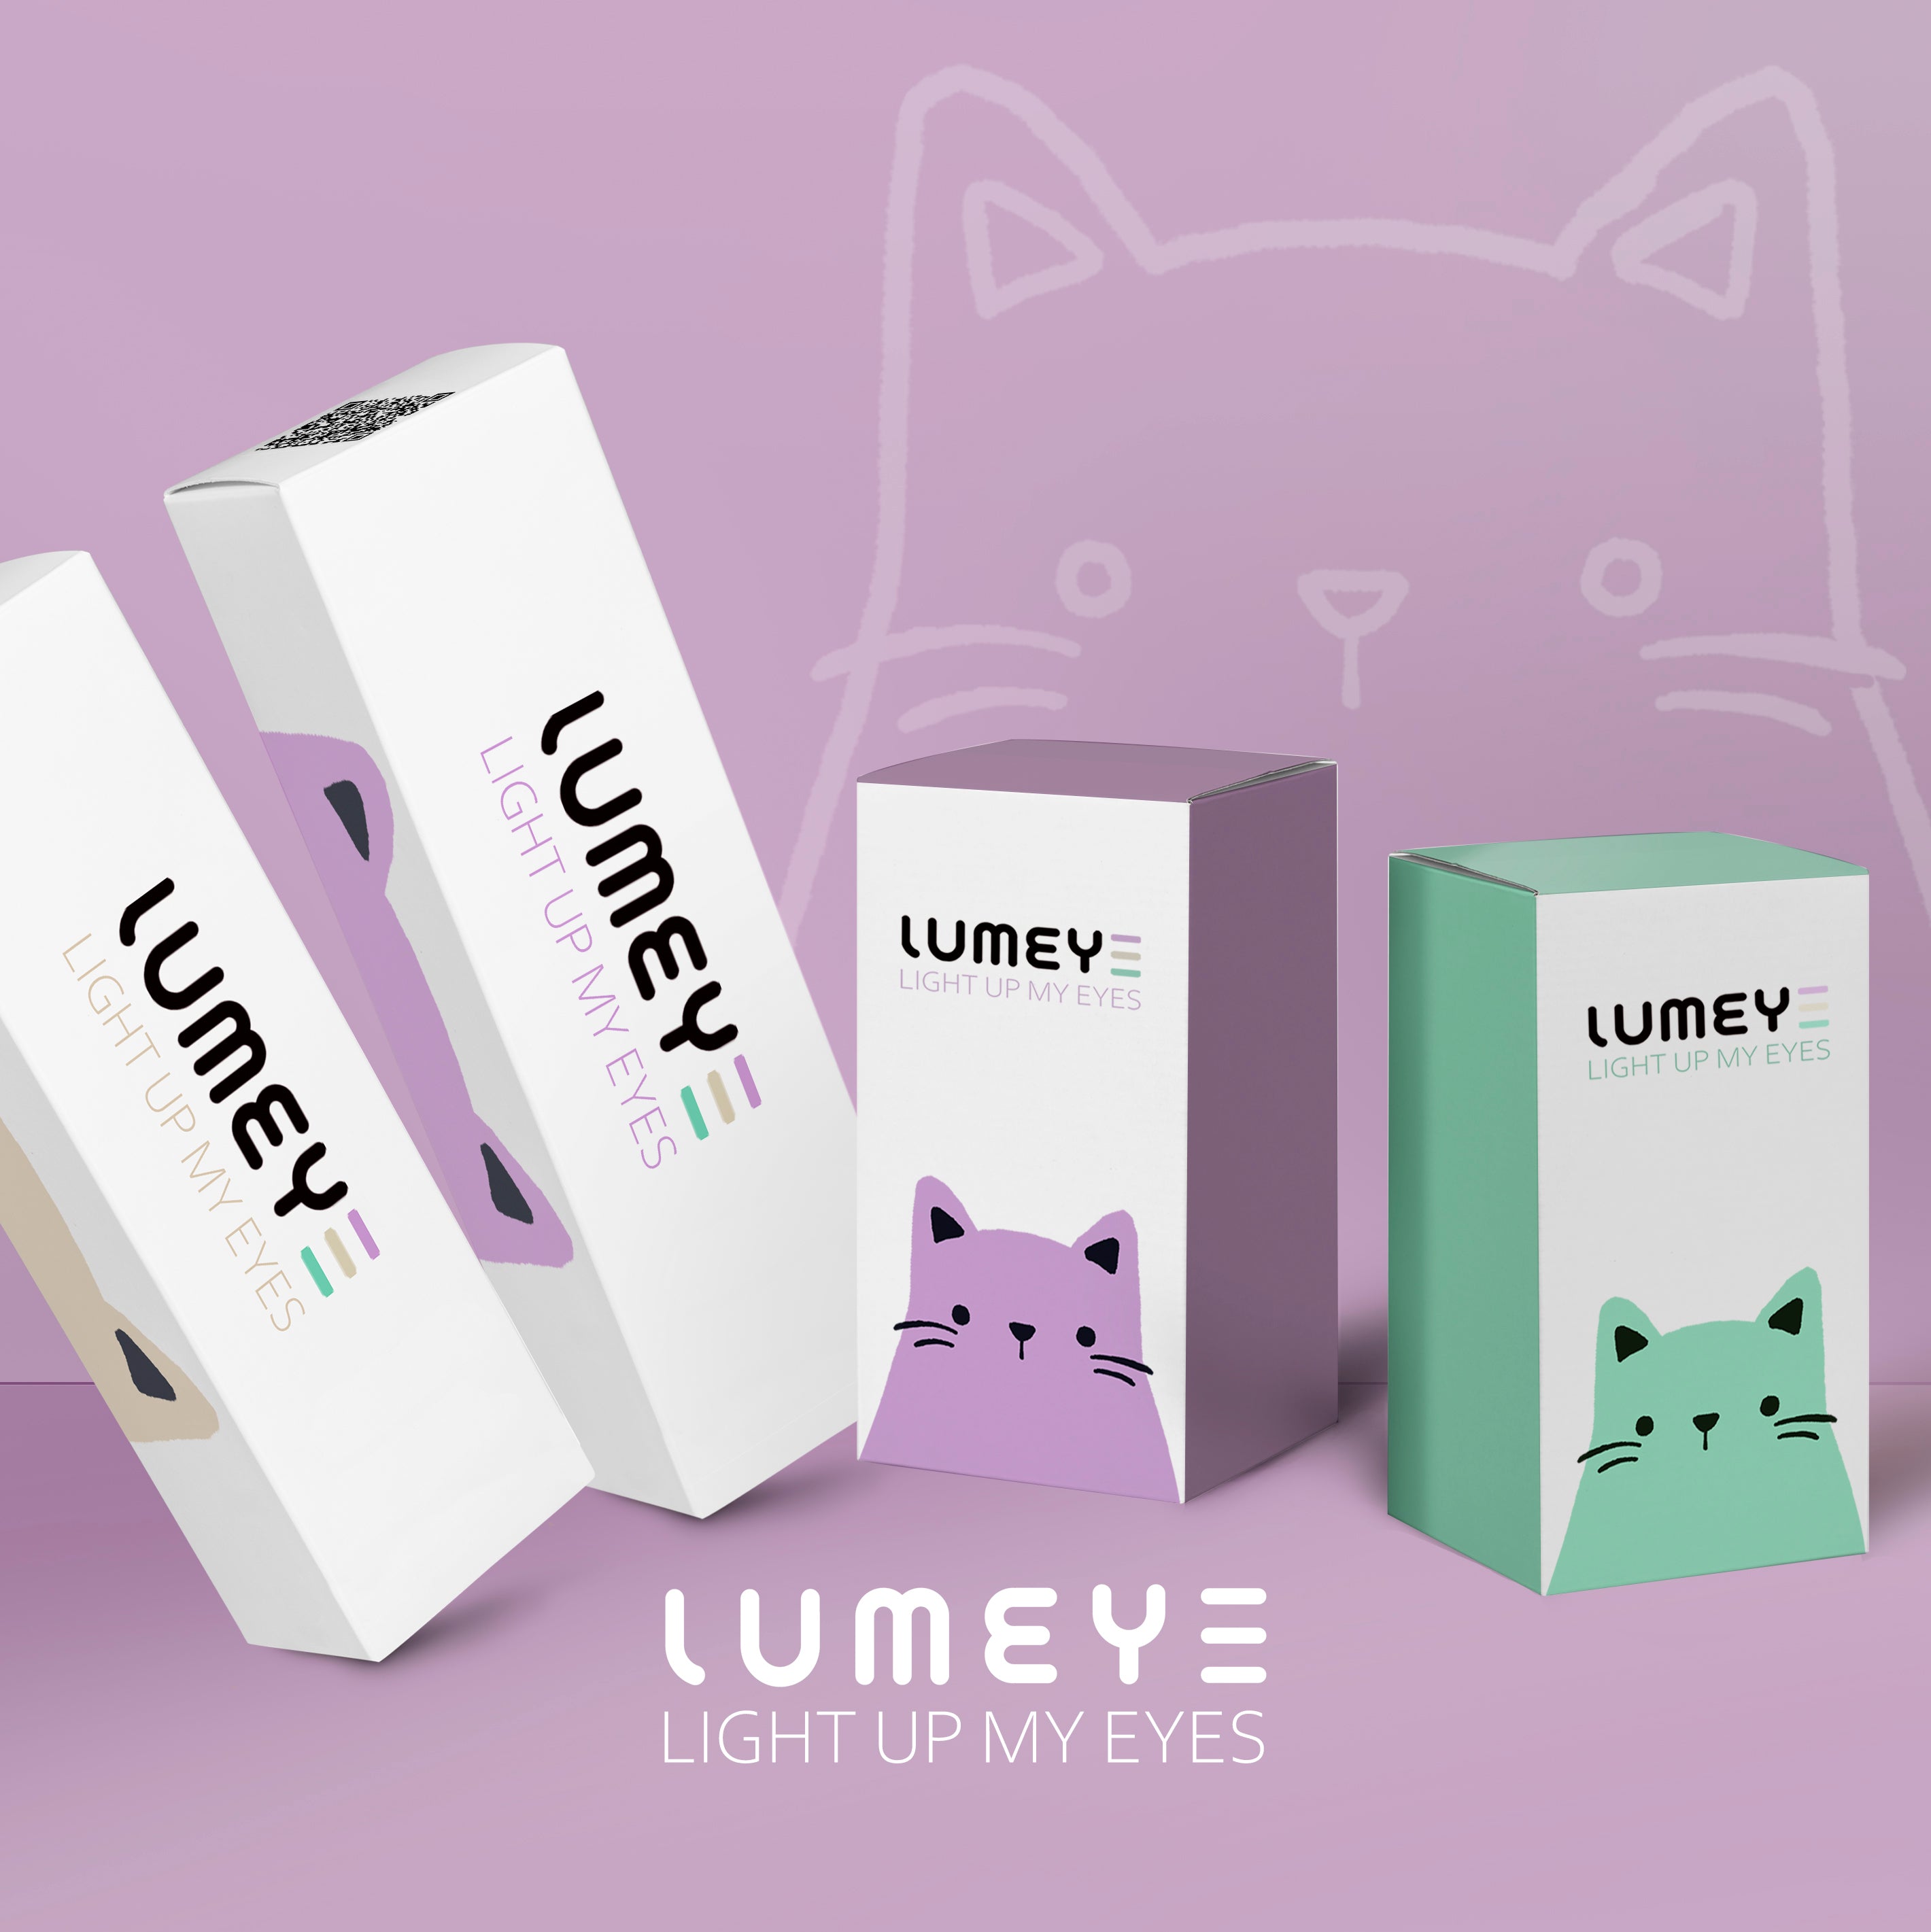 Best COLORED CONTACTS - LUMEYE Candy Peanut Butter Brown Colored Contact Lenses - LUMEYE